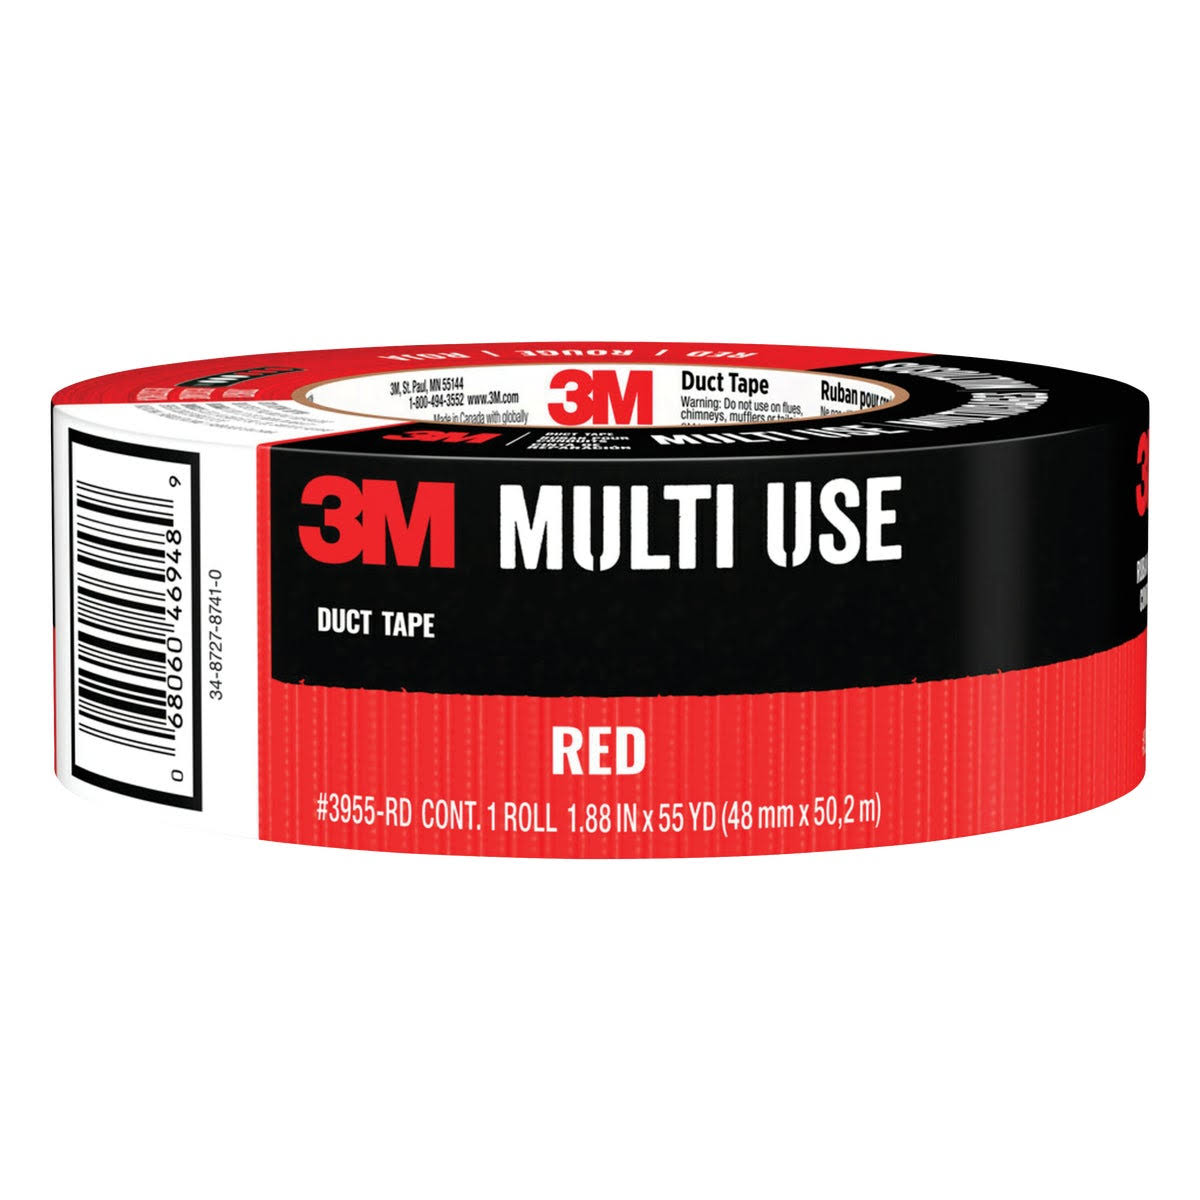 3M Duct Tape Red 1.88-In. x 60-yd. 3955-RD